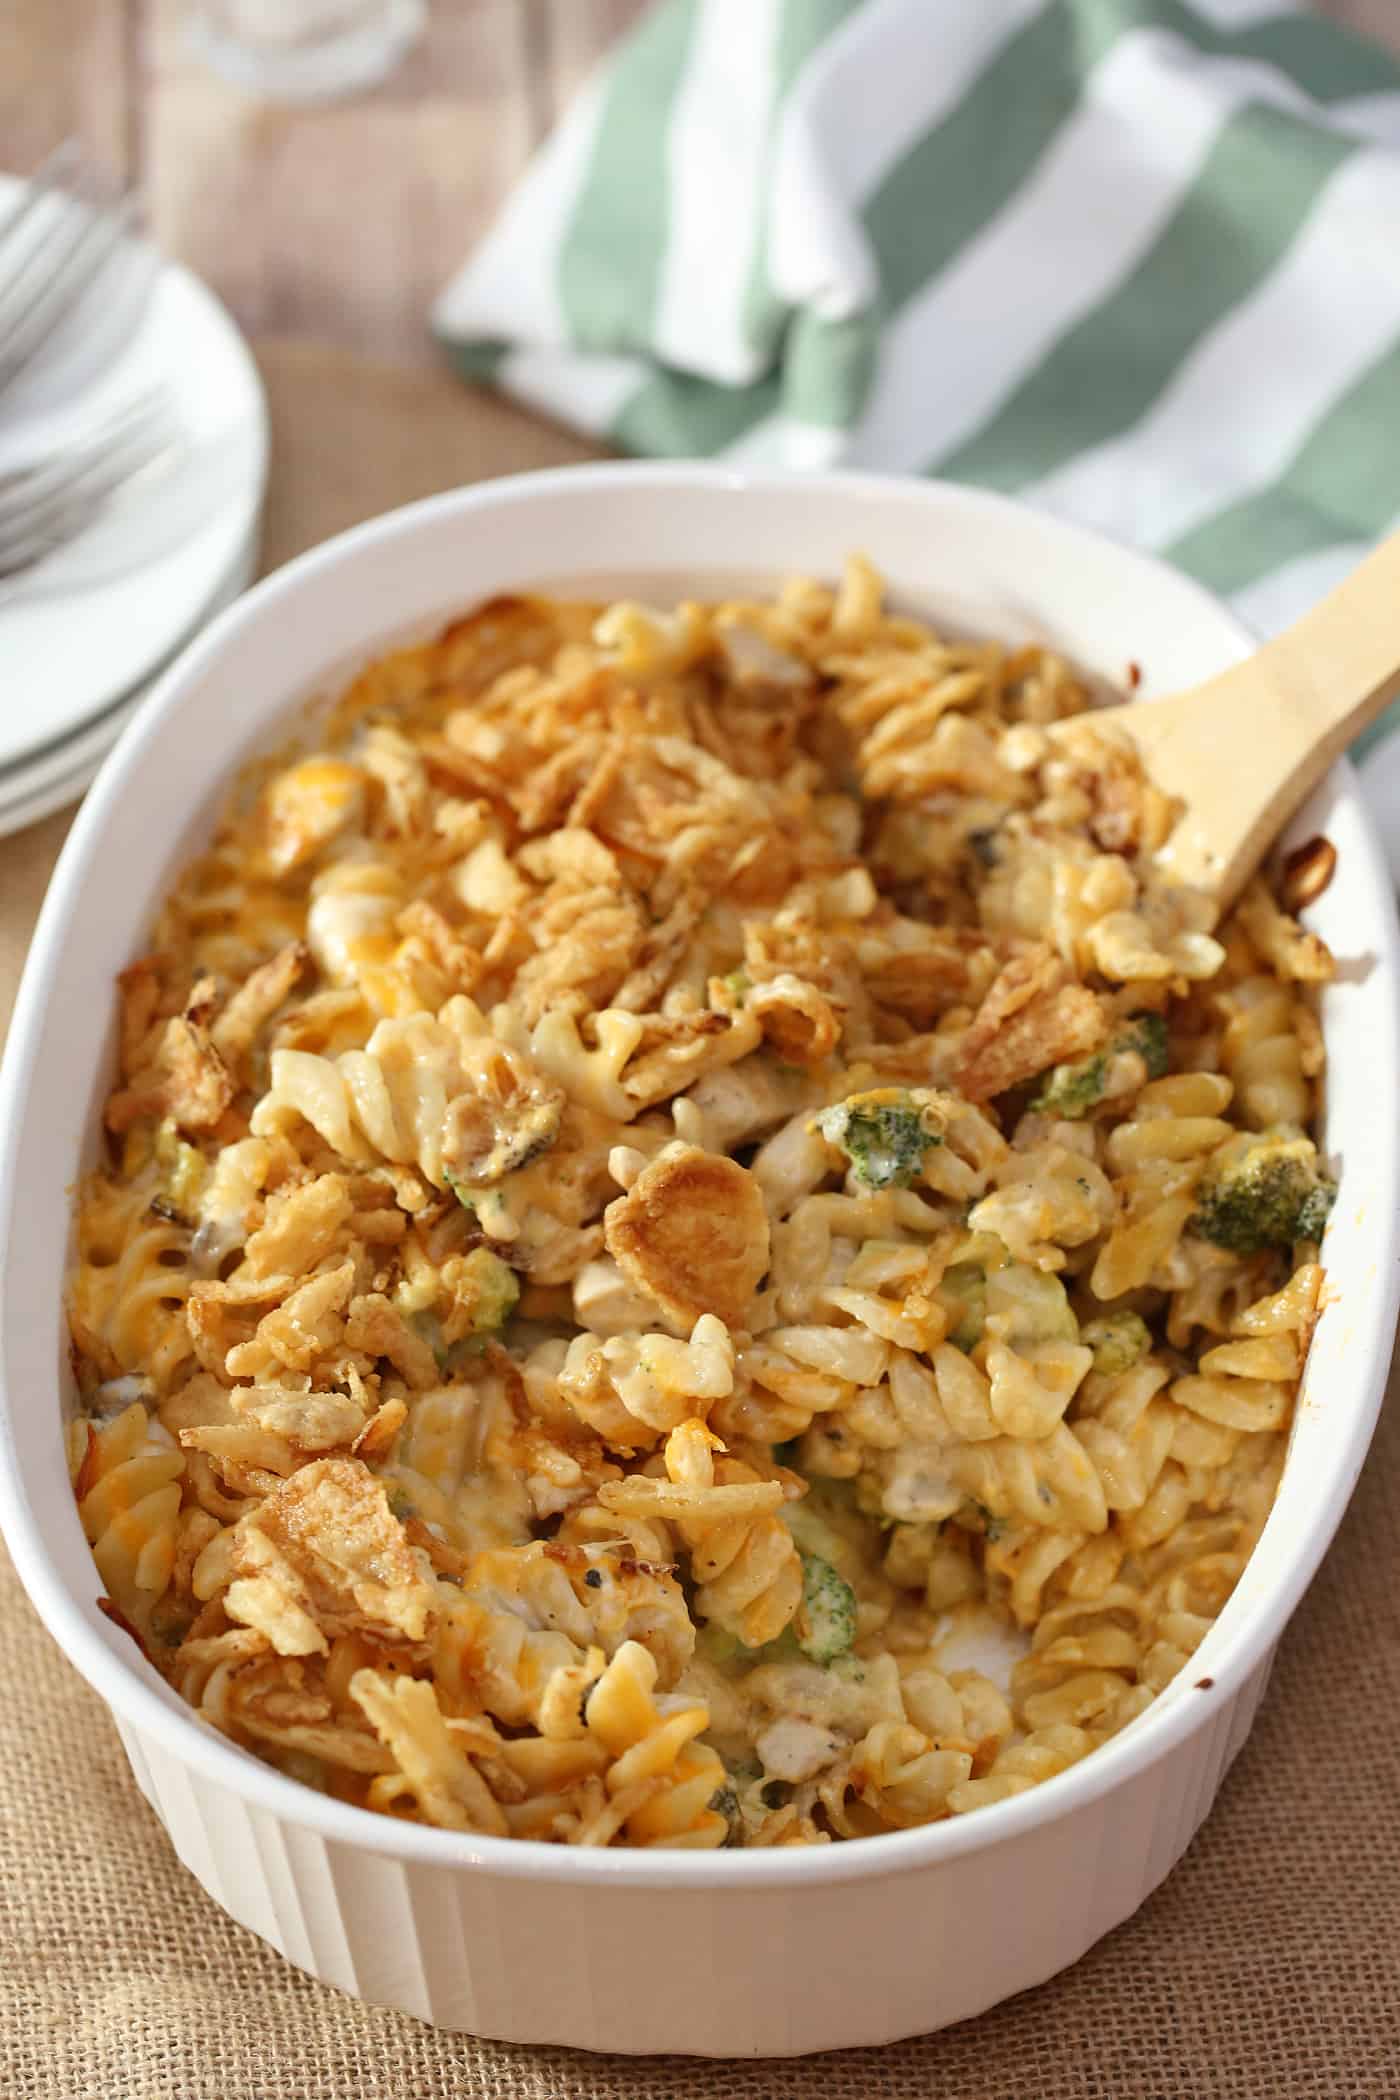 chicken noodle casserole in a dish with wooden spoon